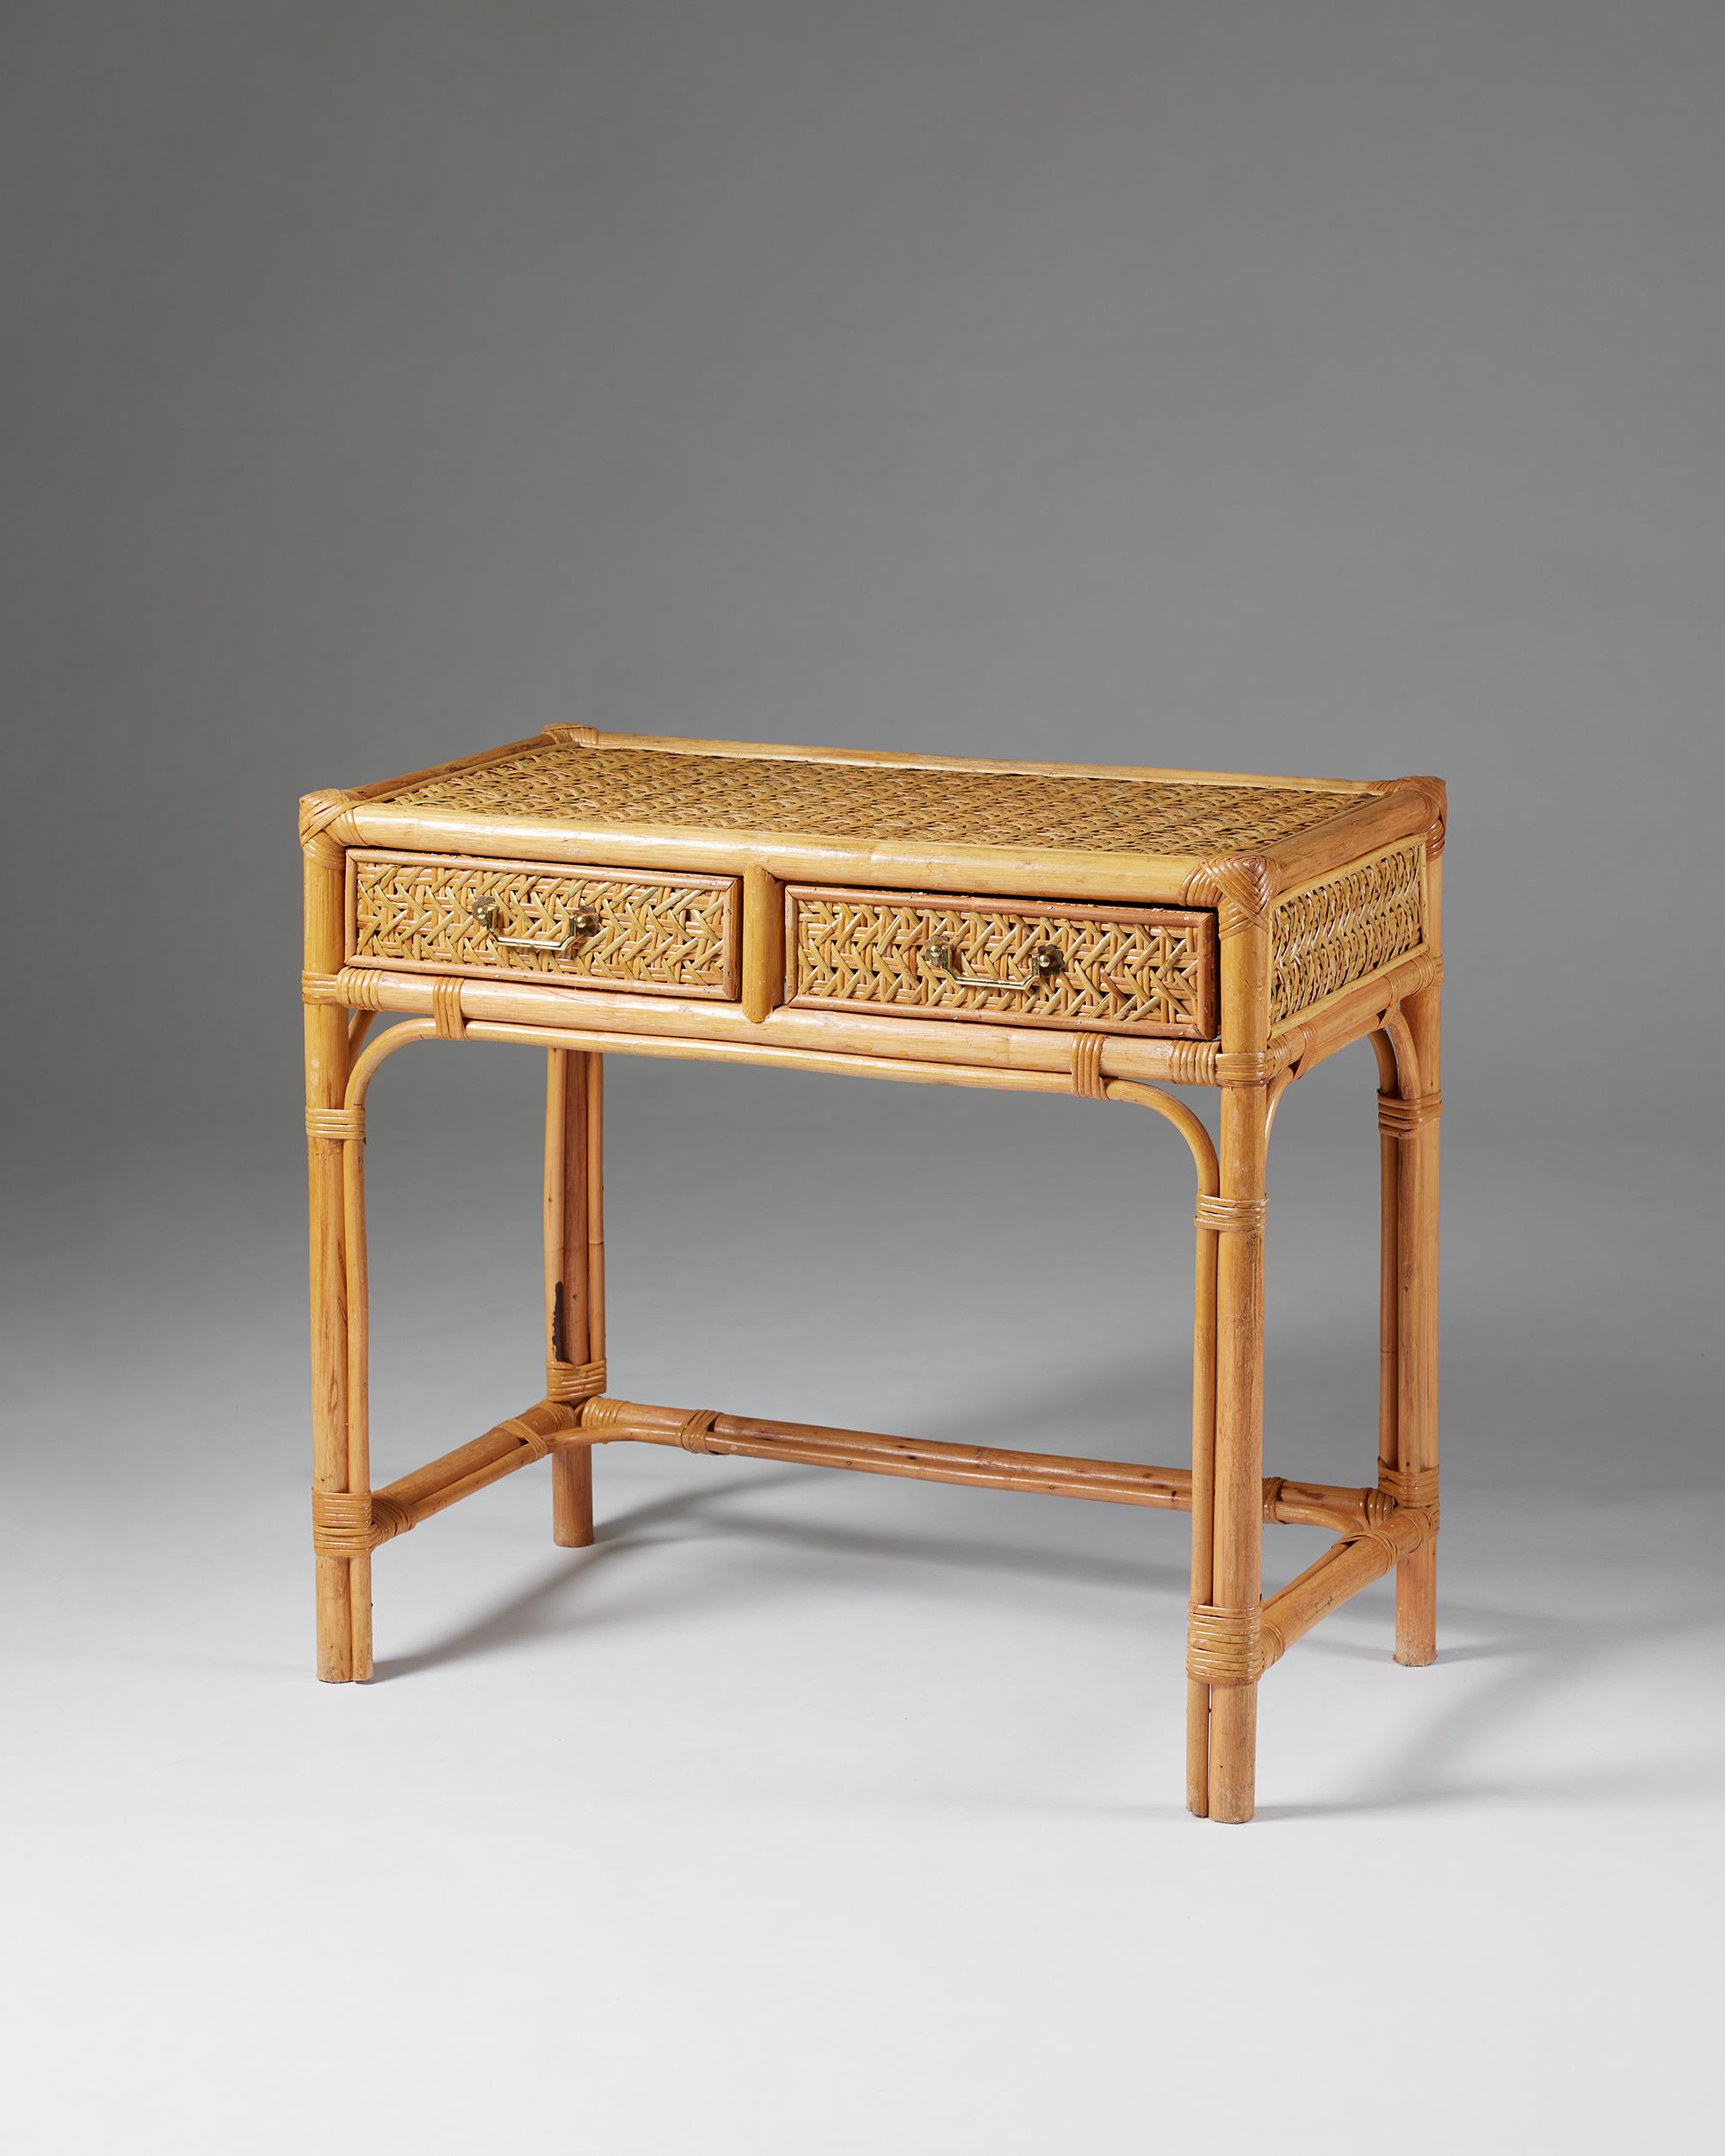 Sideboard / Side table, anonymous for DUX,
Sweden, 1960s.

Bamboo, rattan, and brass.

H: 74 cm / 2' 5''
L: 84 cm / 2' 9''
D: 47 cm / 18 1/2''